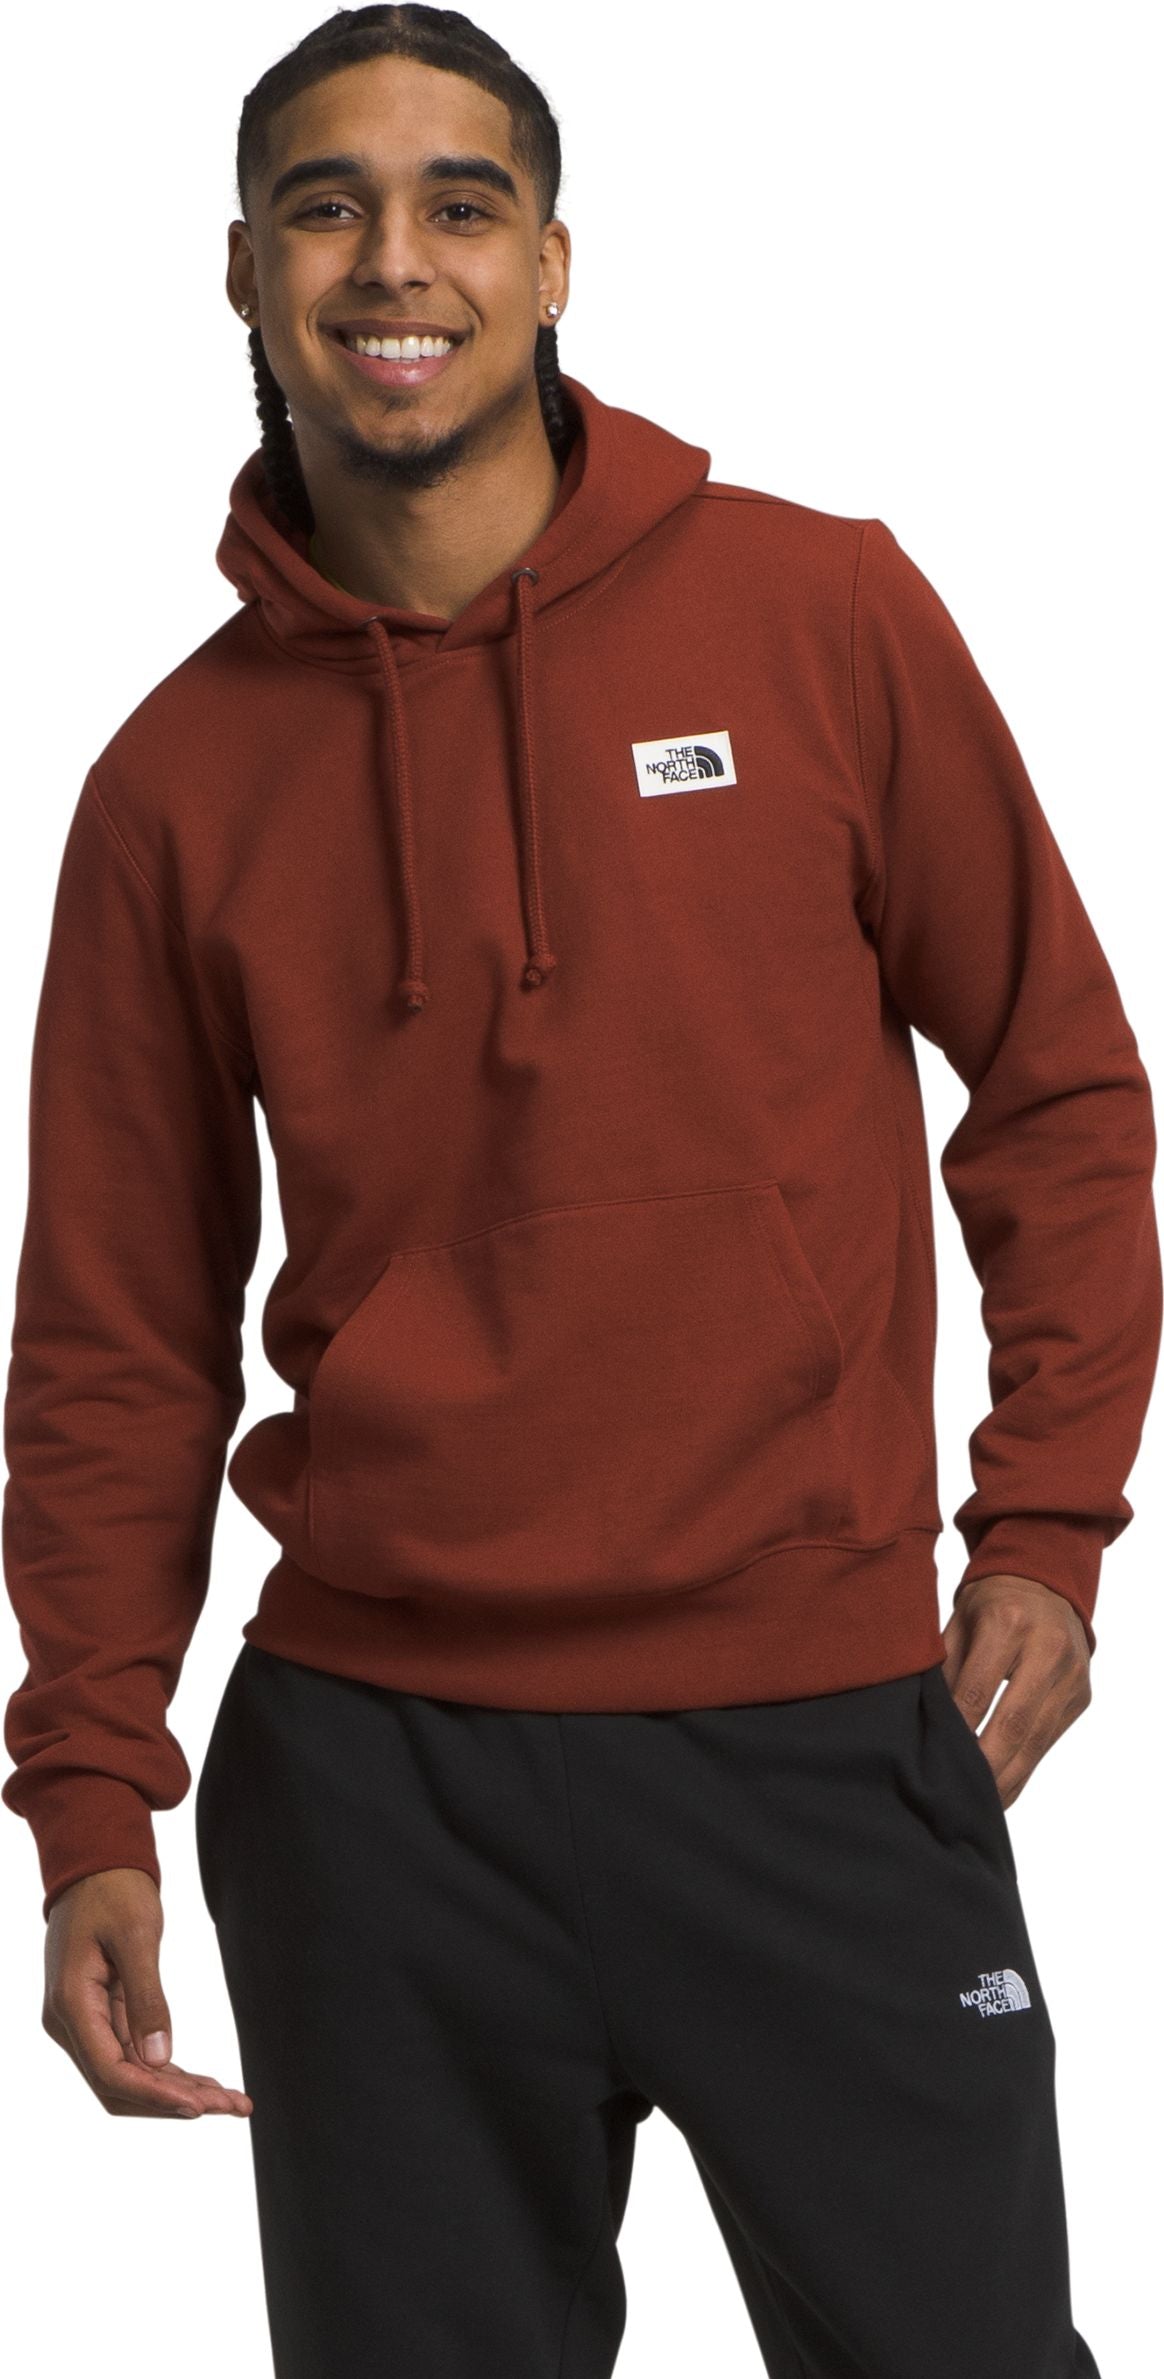 http://www.quarkshoes.com/cdn/shop/products/The_20North_20Face-Apparel-M-Heritage-Patch-Pullover-Hoodie-Brandy-Brown-108243.jpg?v=1697147224